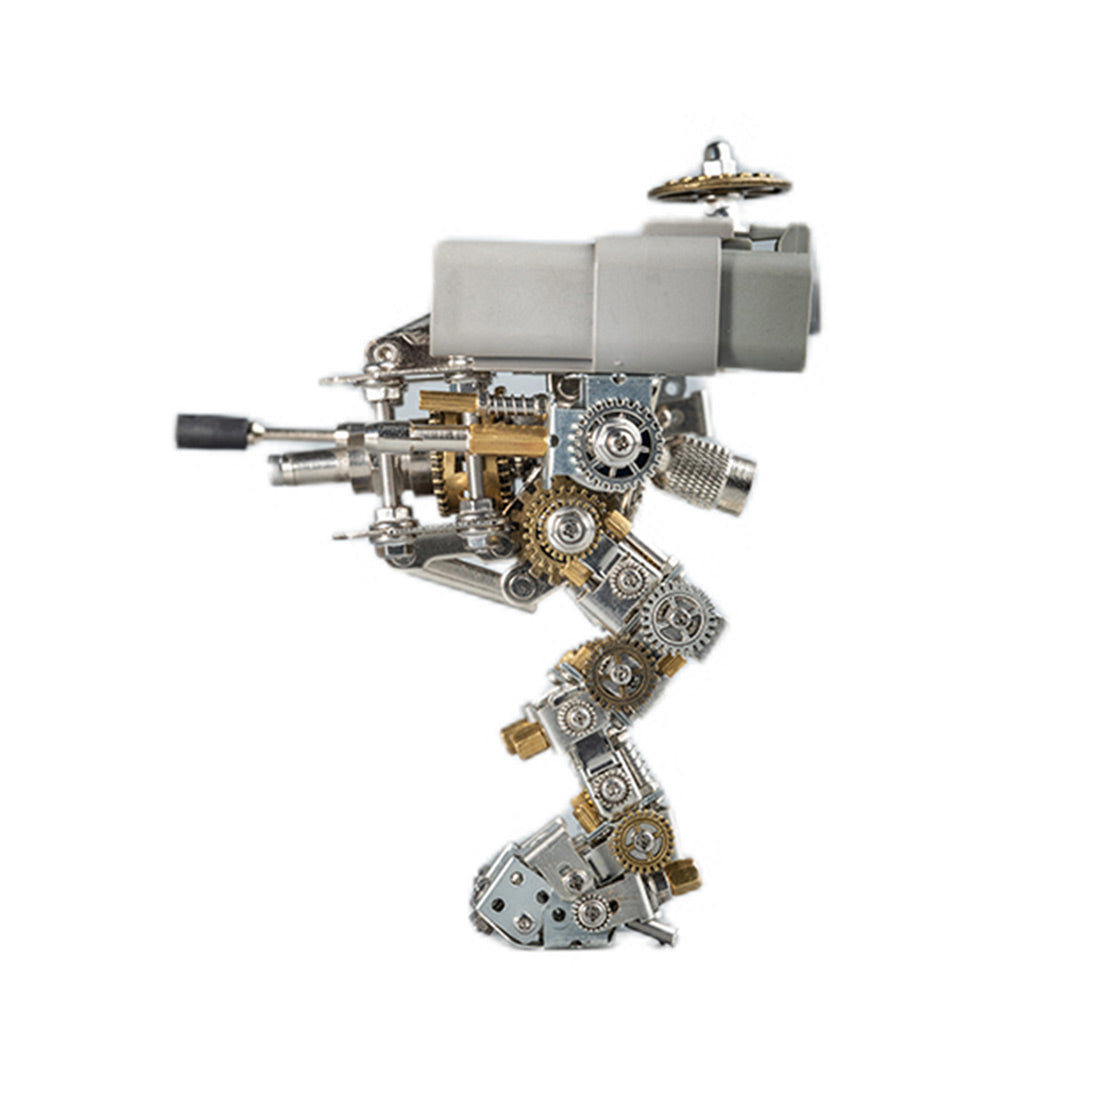  Ferthor Fun Metal Building Military Series Assembly